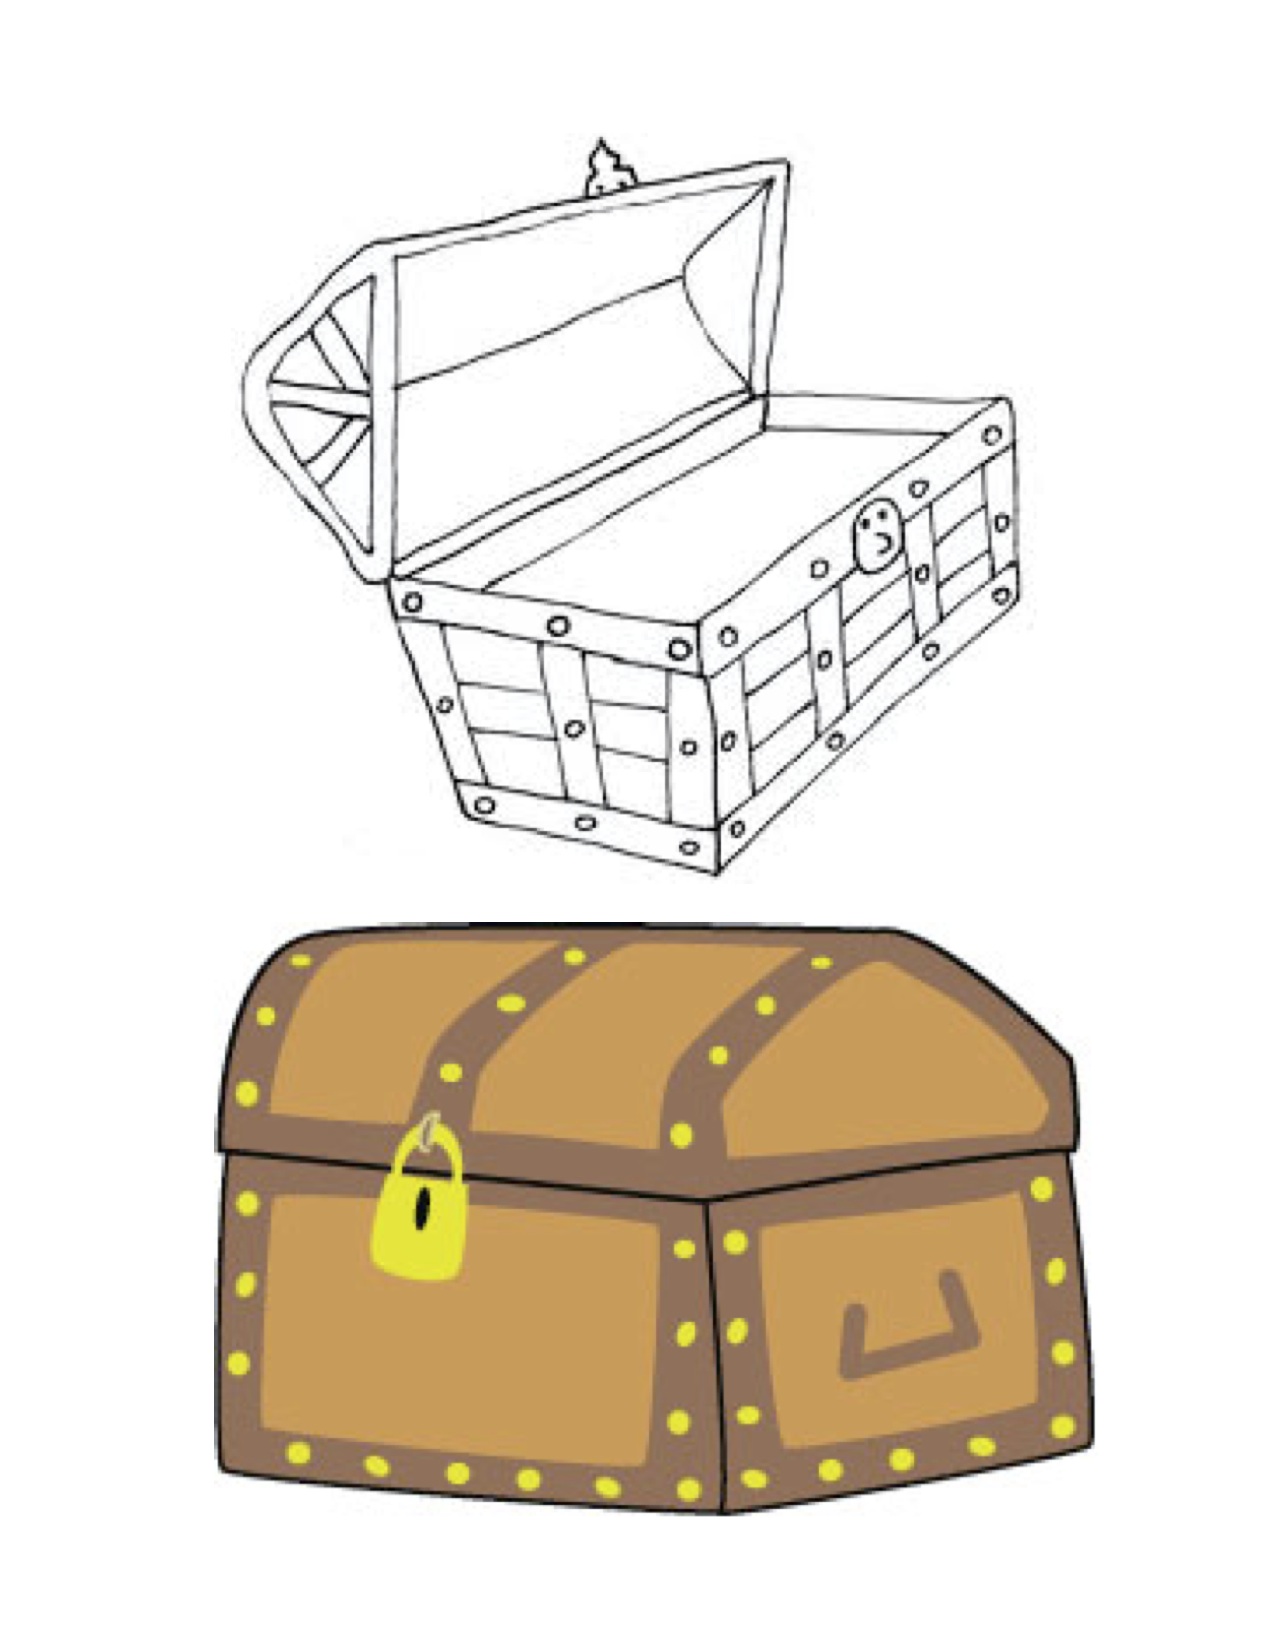 free clipart images treasure chest - photo #48